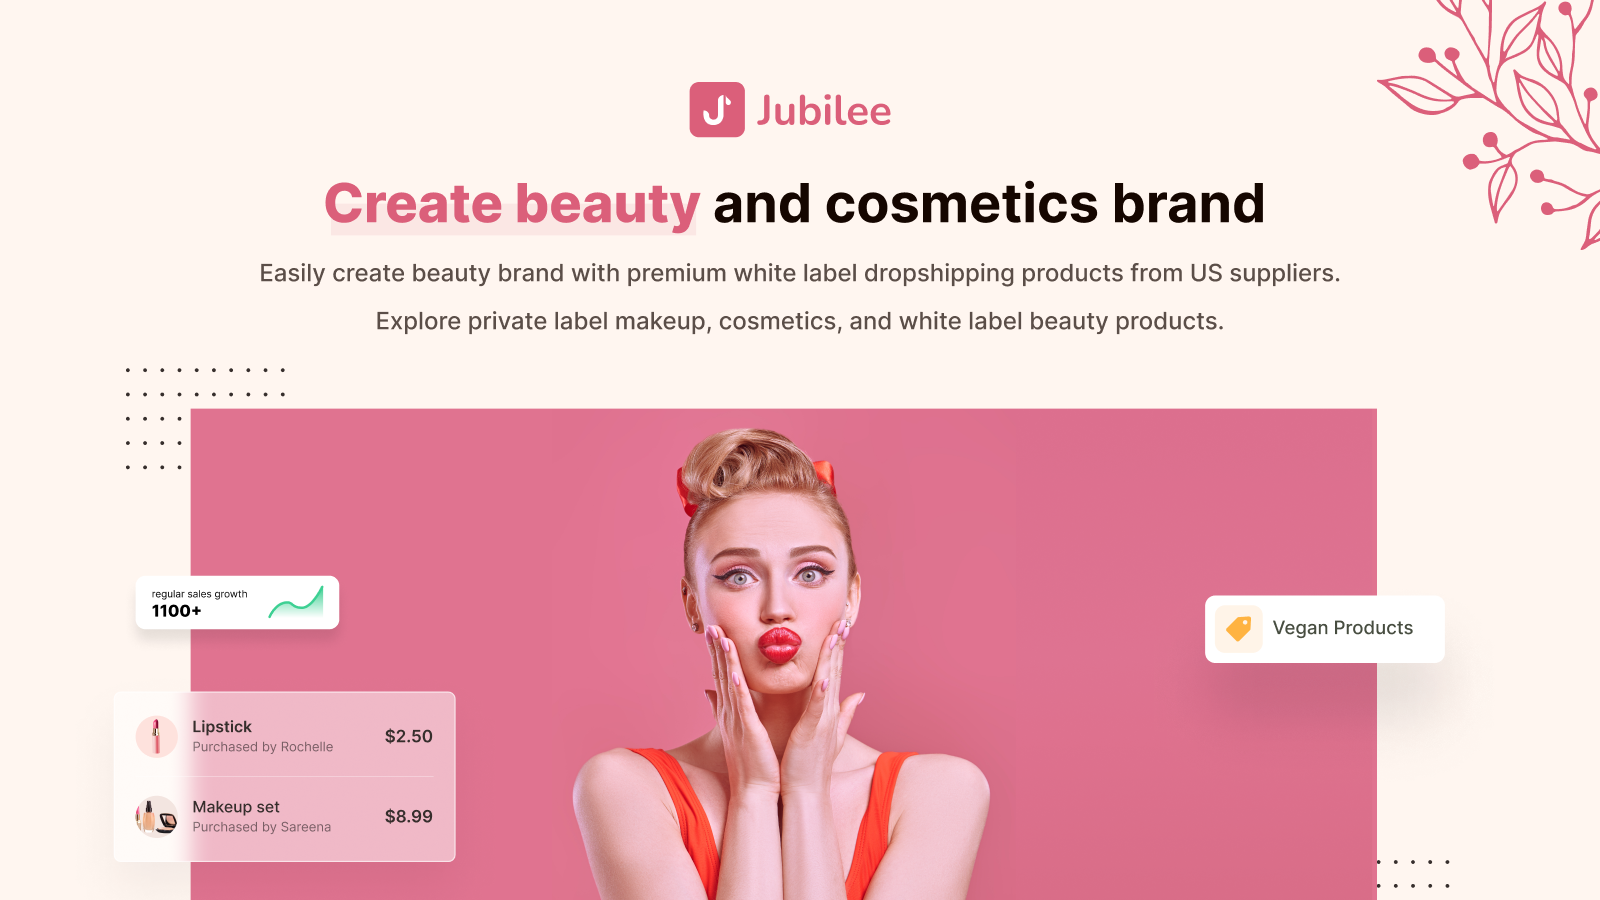 jubilee - Your own beauty brand with premium white label dropshipping